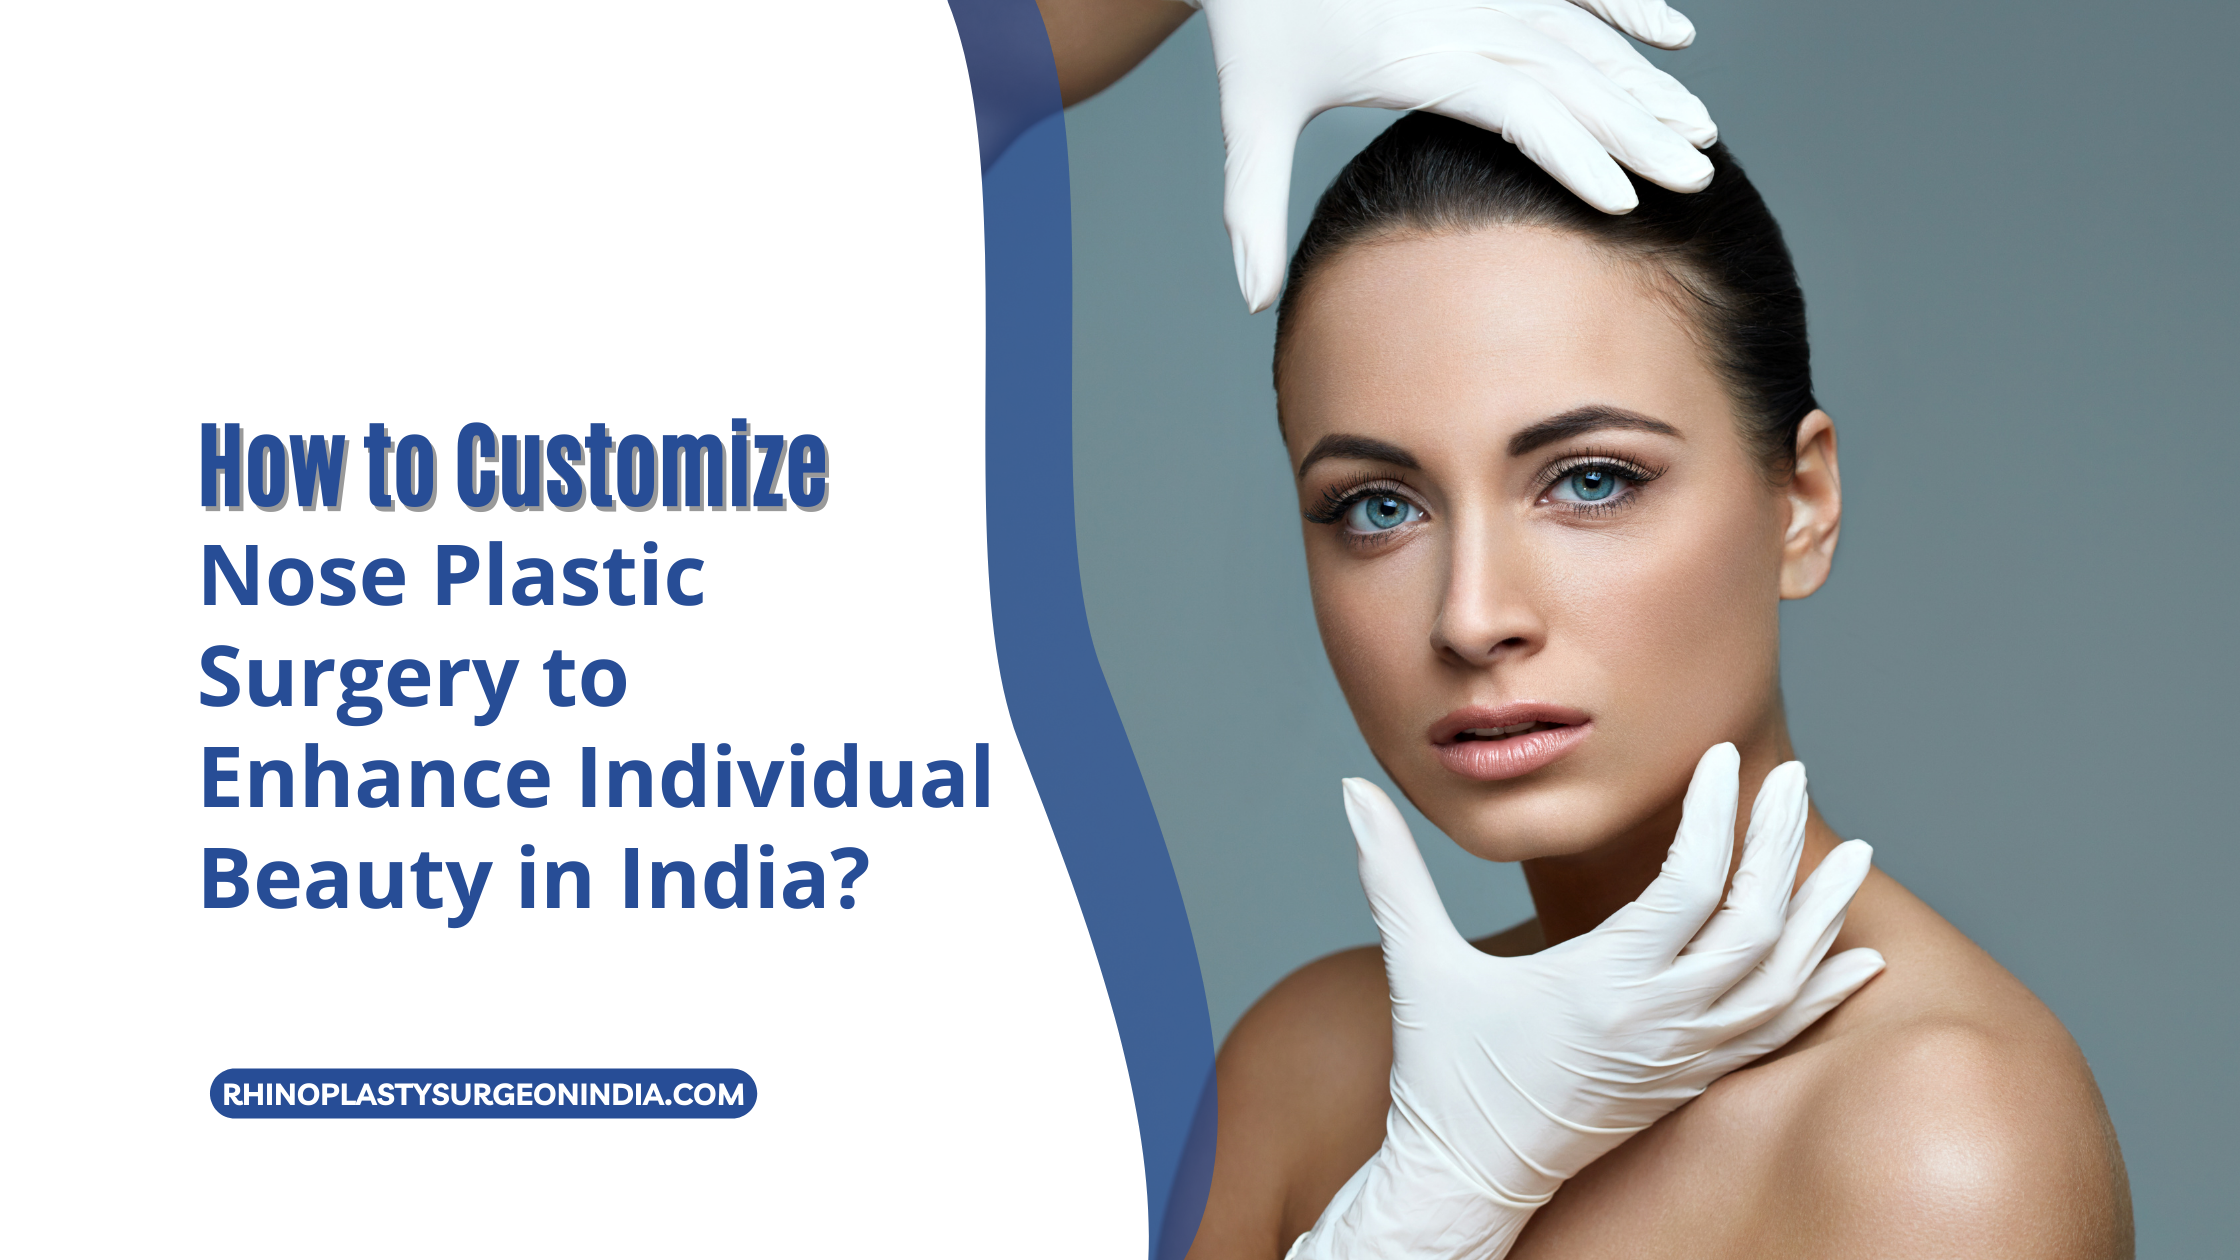 How to Customize Nose Plastic Surgery to Enhance Individual Beauty in India